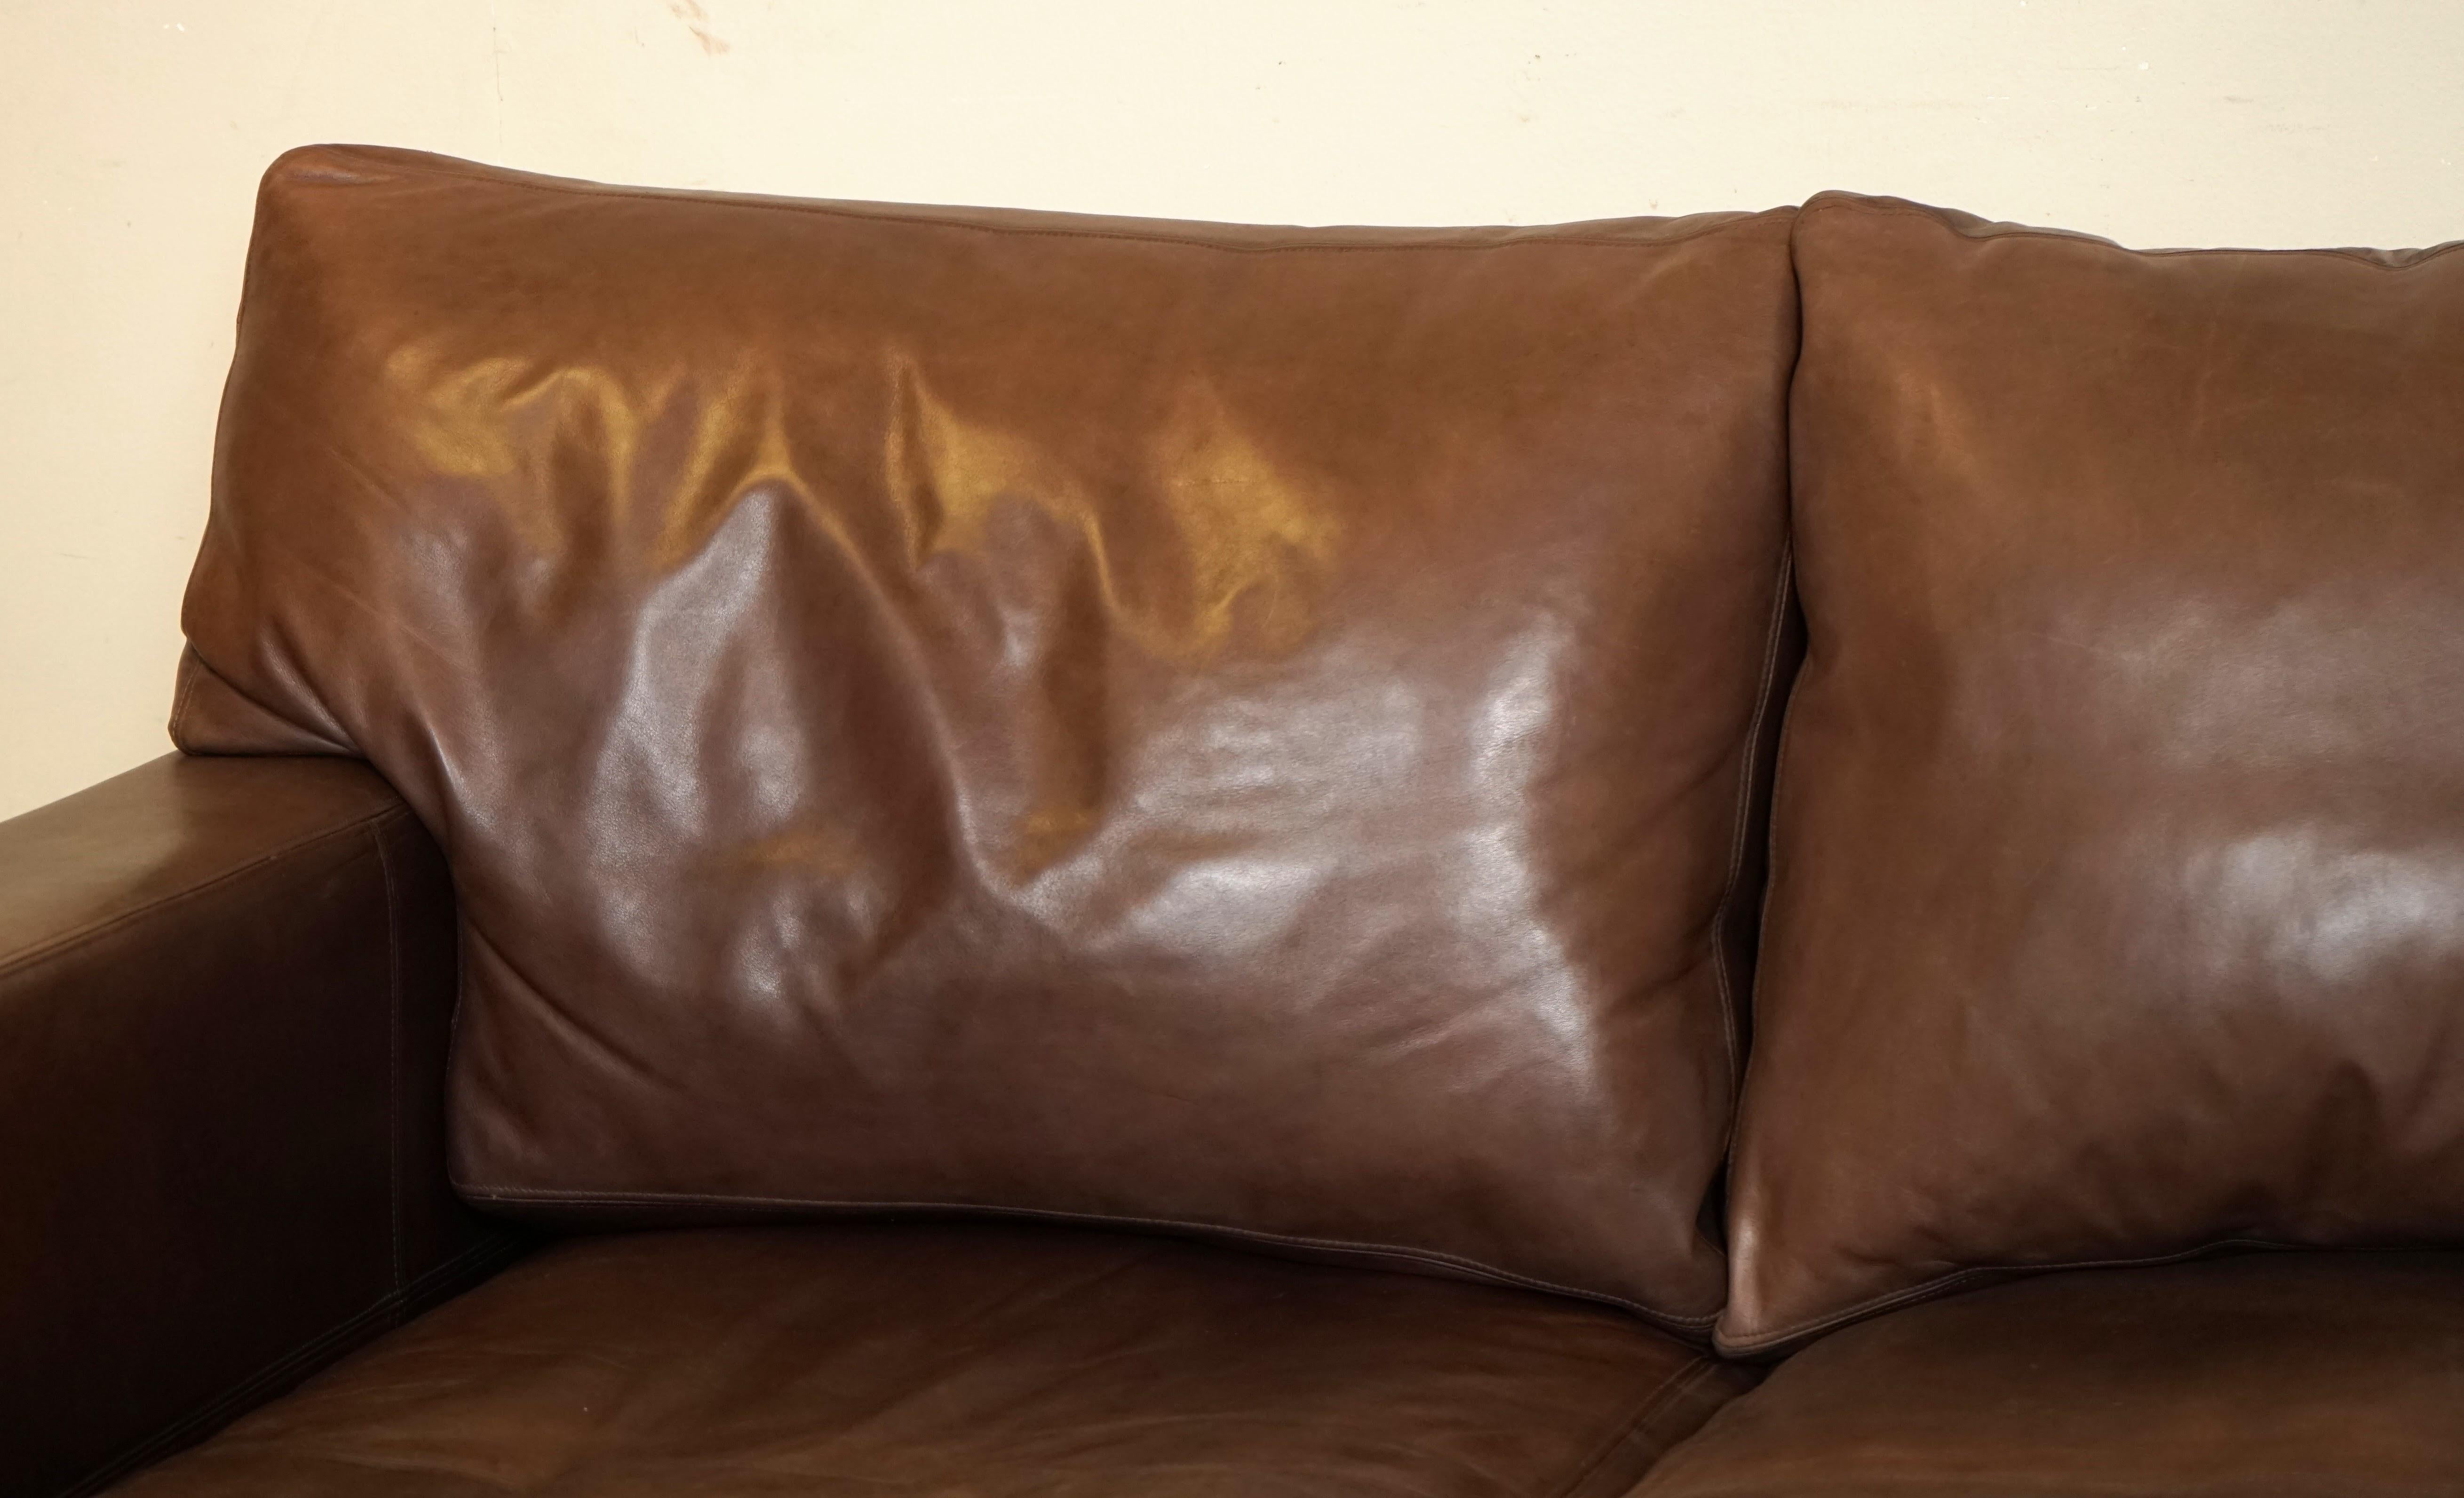 Hand-Crafted Collins & Hayes Buttery Soft Leather Three Seater Sofa with Feather Filled Back